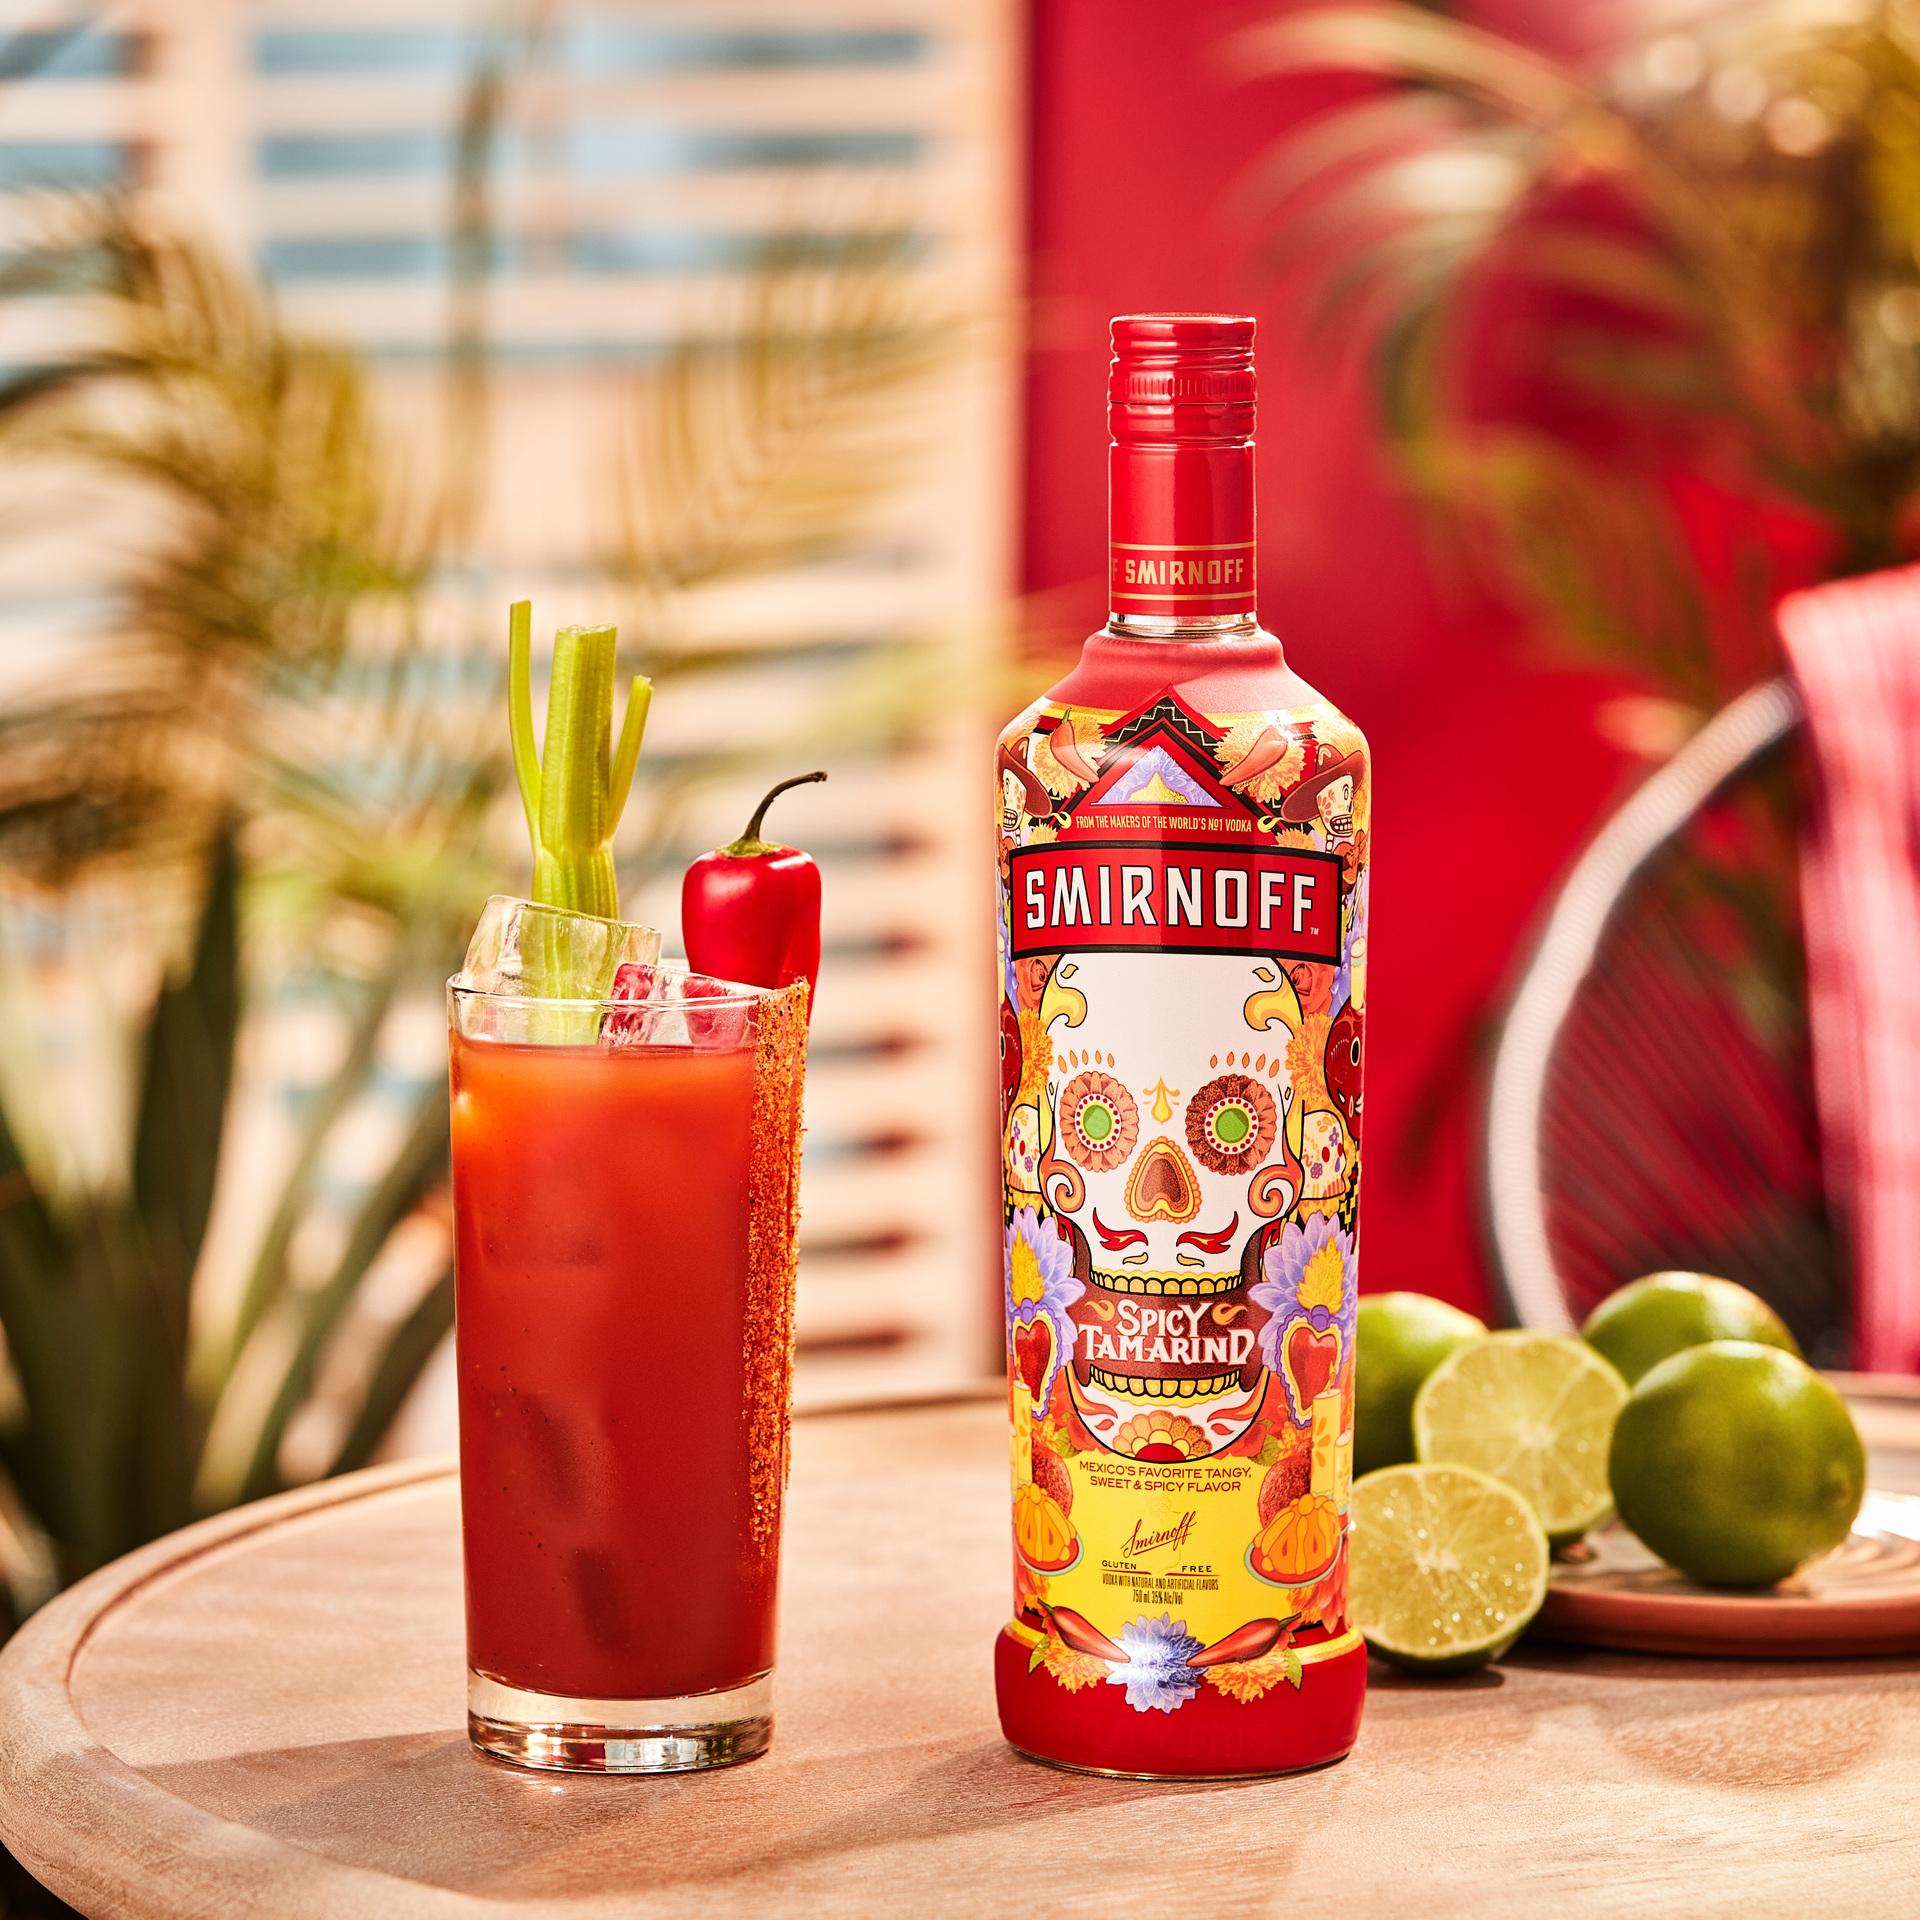 Smirnoff Spicy Tamarind vodka bottle alongside a red colored Spicy Bloody cocktail with spicy seasoning and celery garnish. 